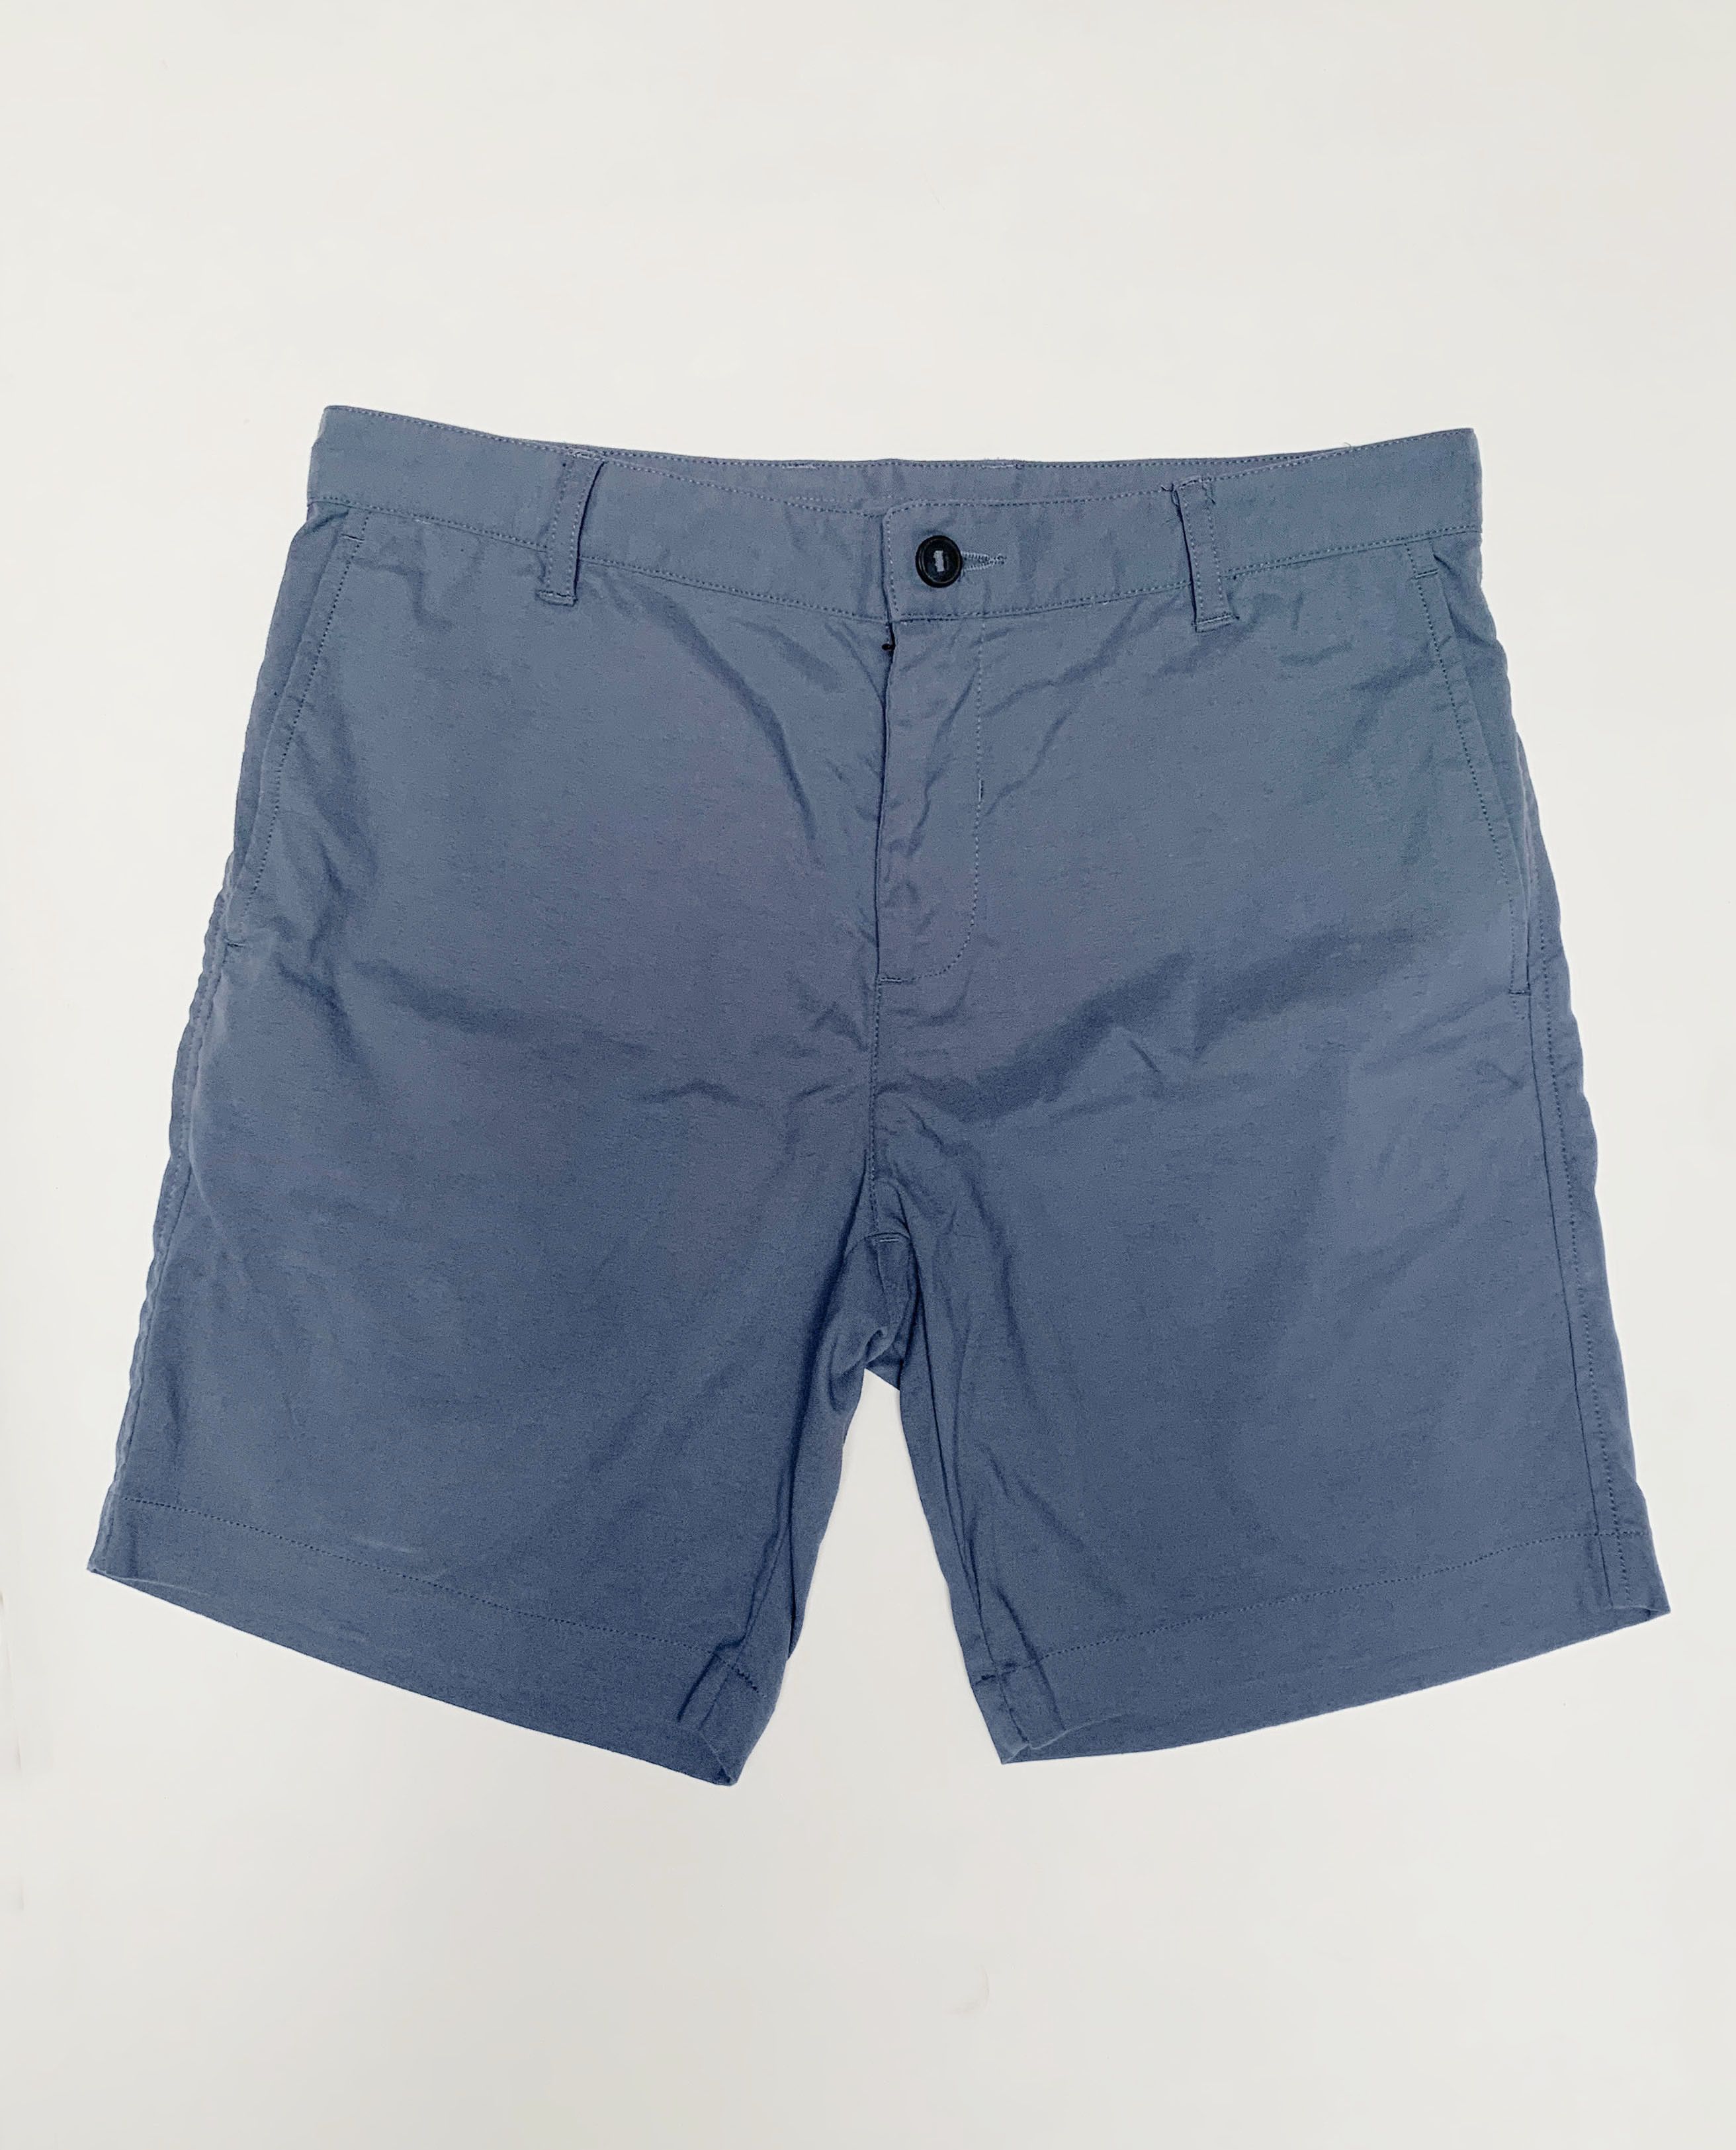 Outlier New Way Shorts | Grailed